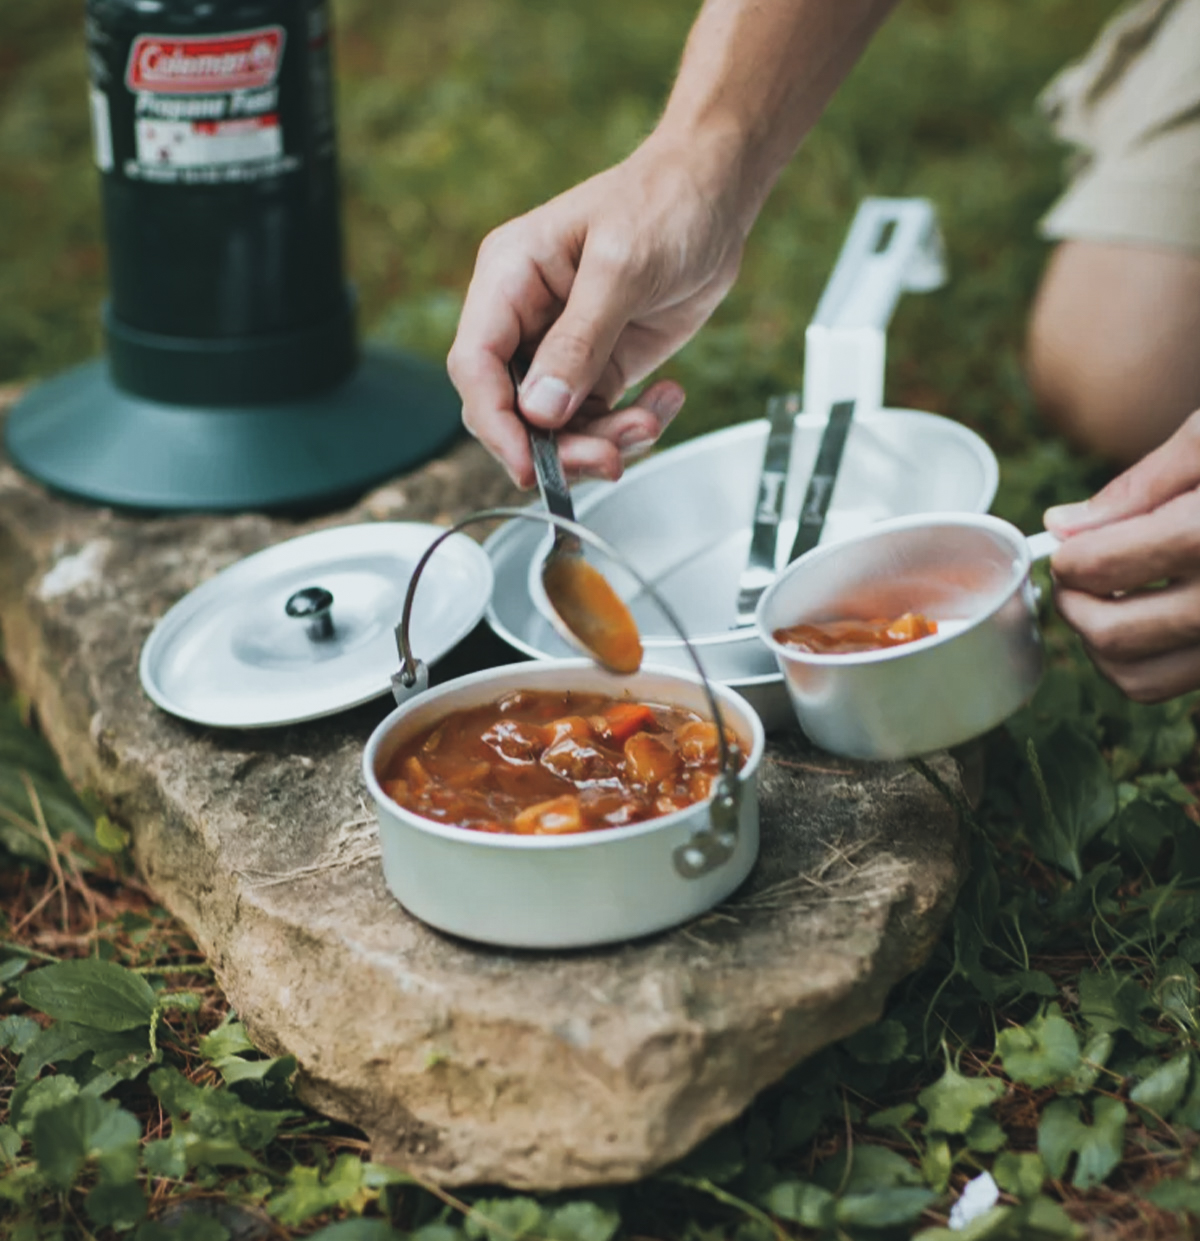 Mess Kits are very popular among backpackers and campers due to them providing essential items for cooking food.